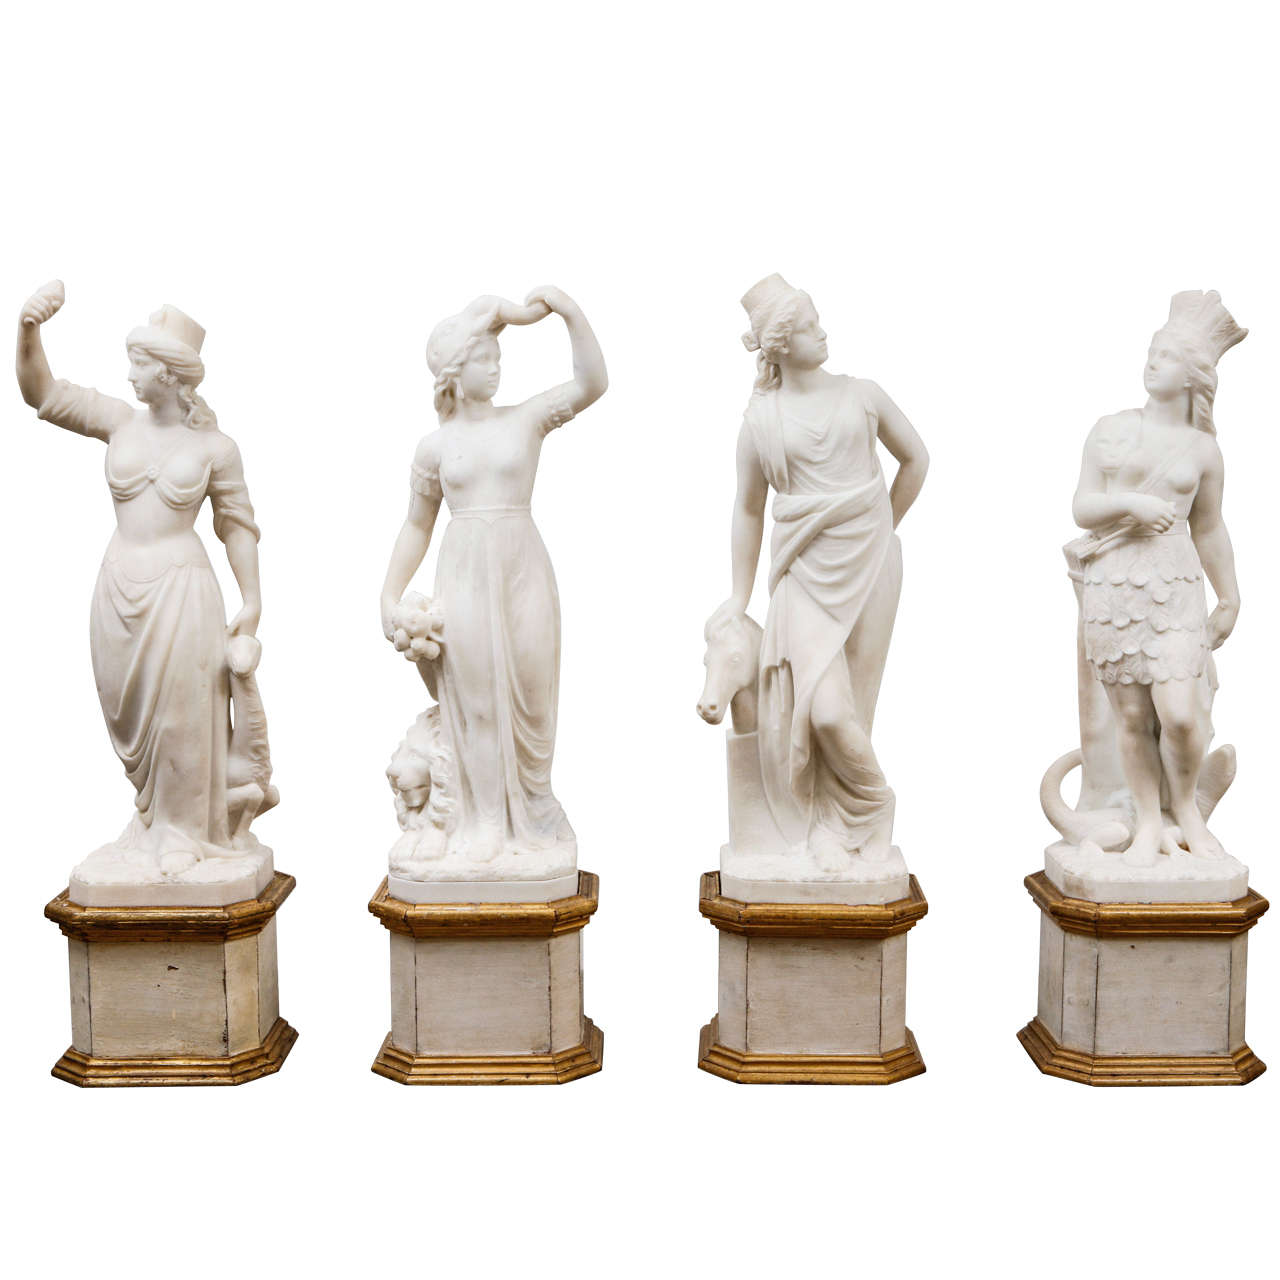 19th Century Italian Carrara Marble Statues of the Four Continents